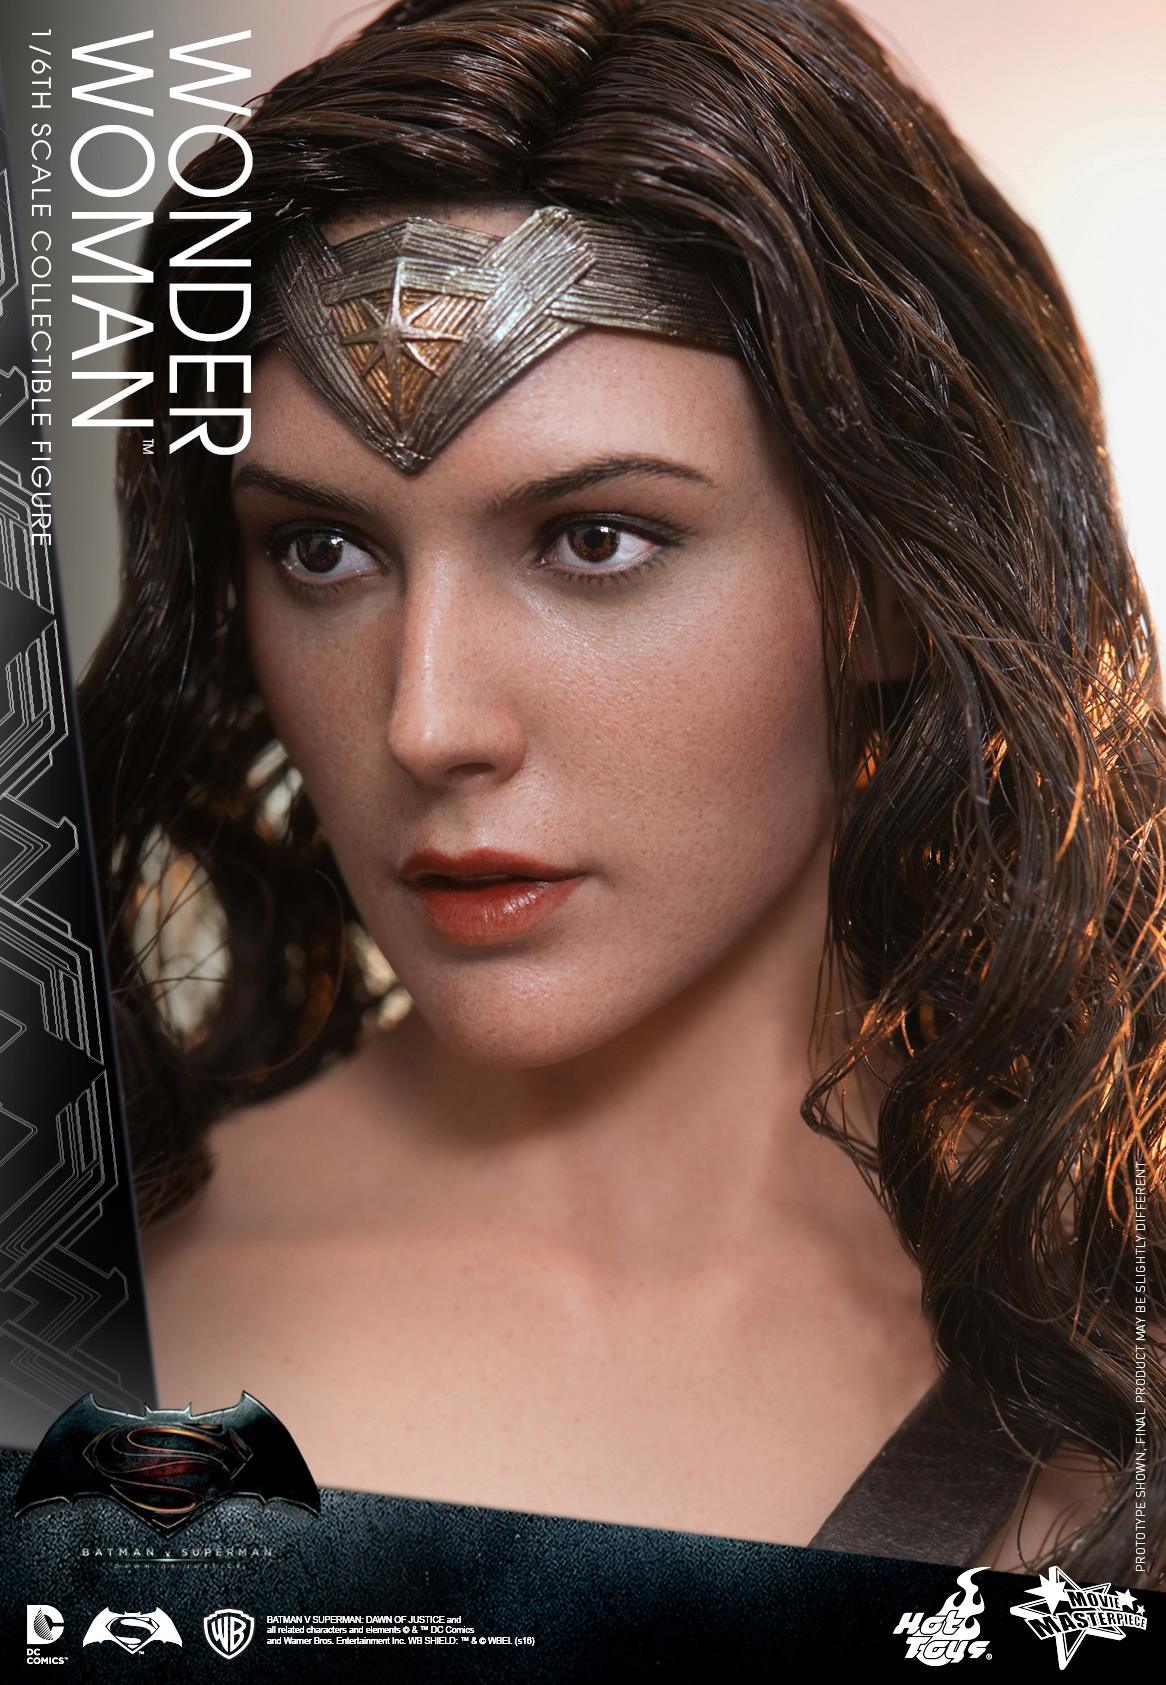 Batman v Superman: Dawn of Justice 1/6th scale Wonder Woman Collectible Figure